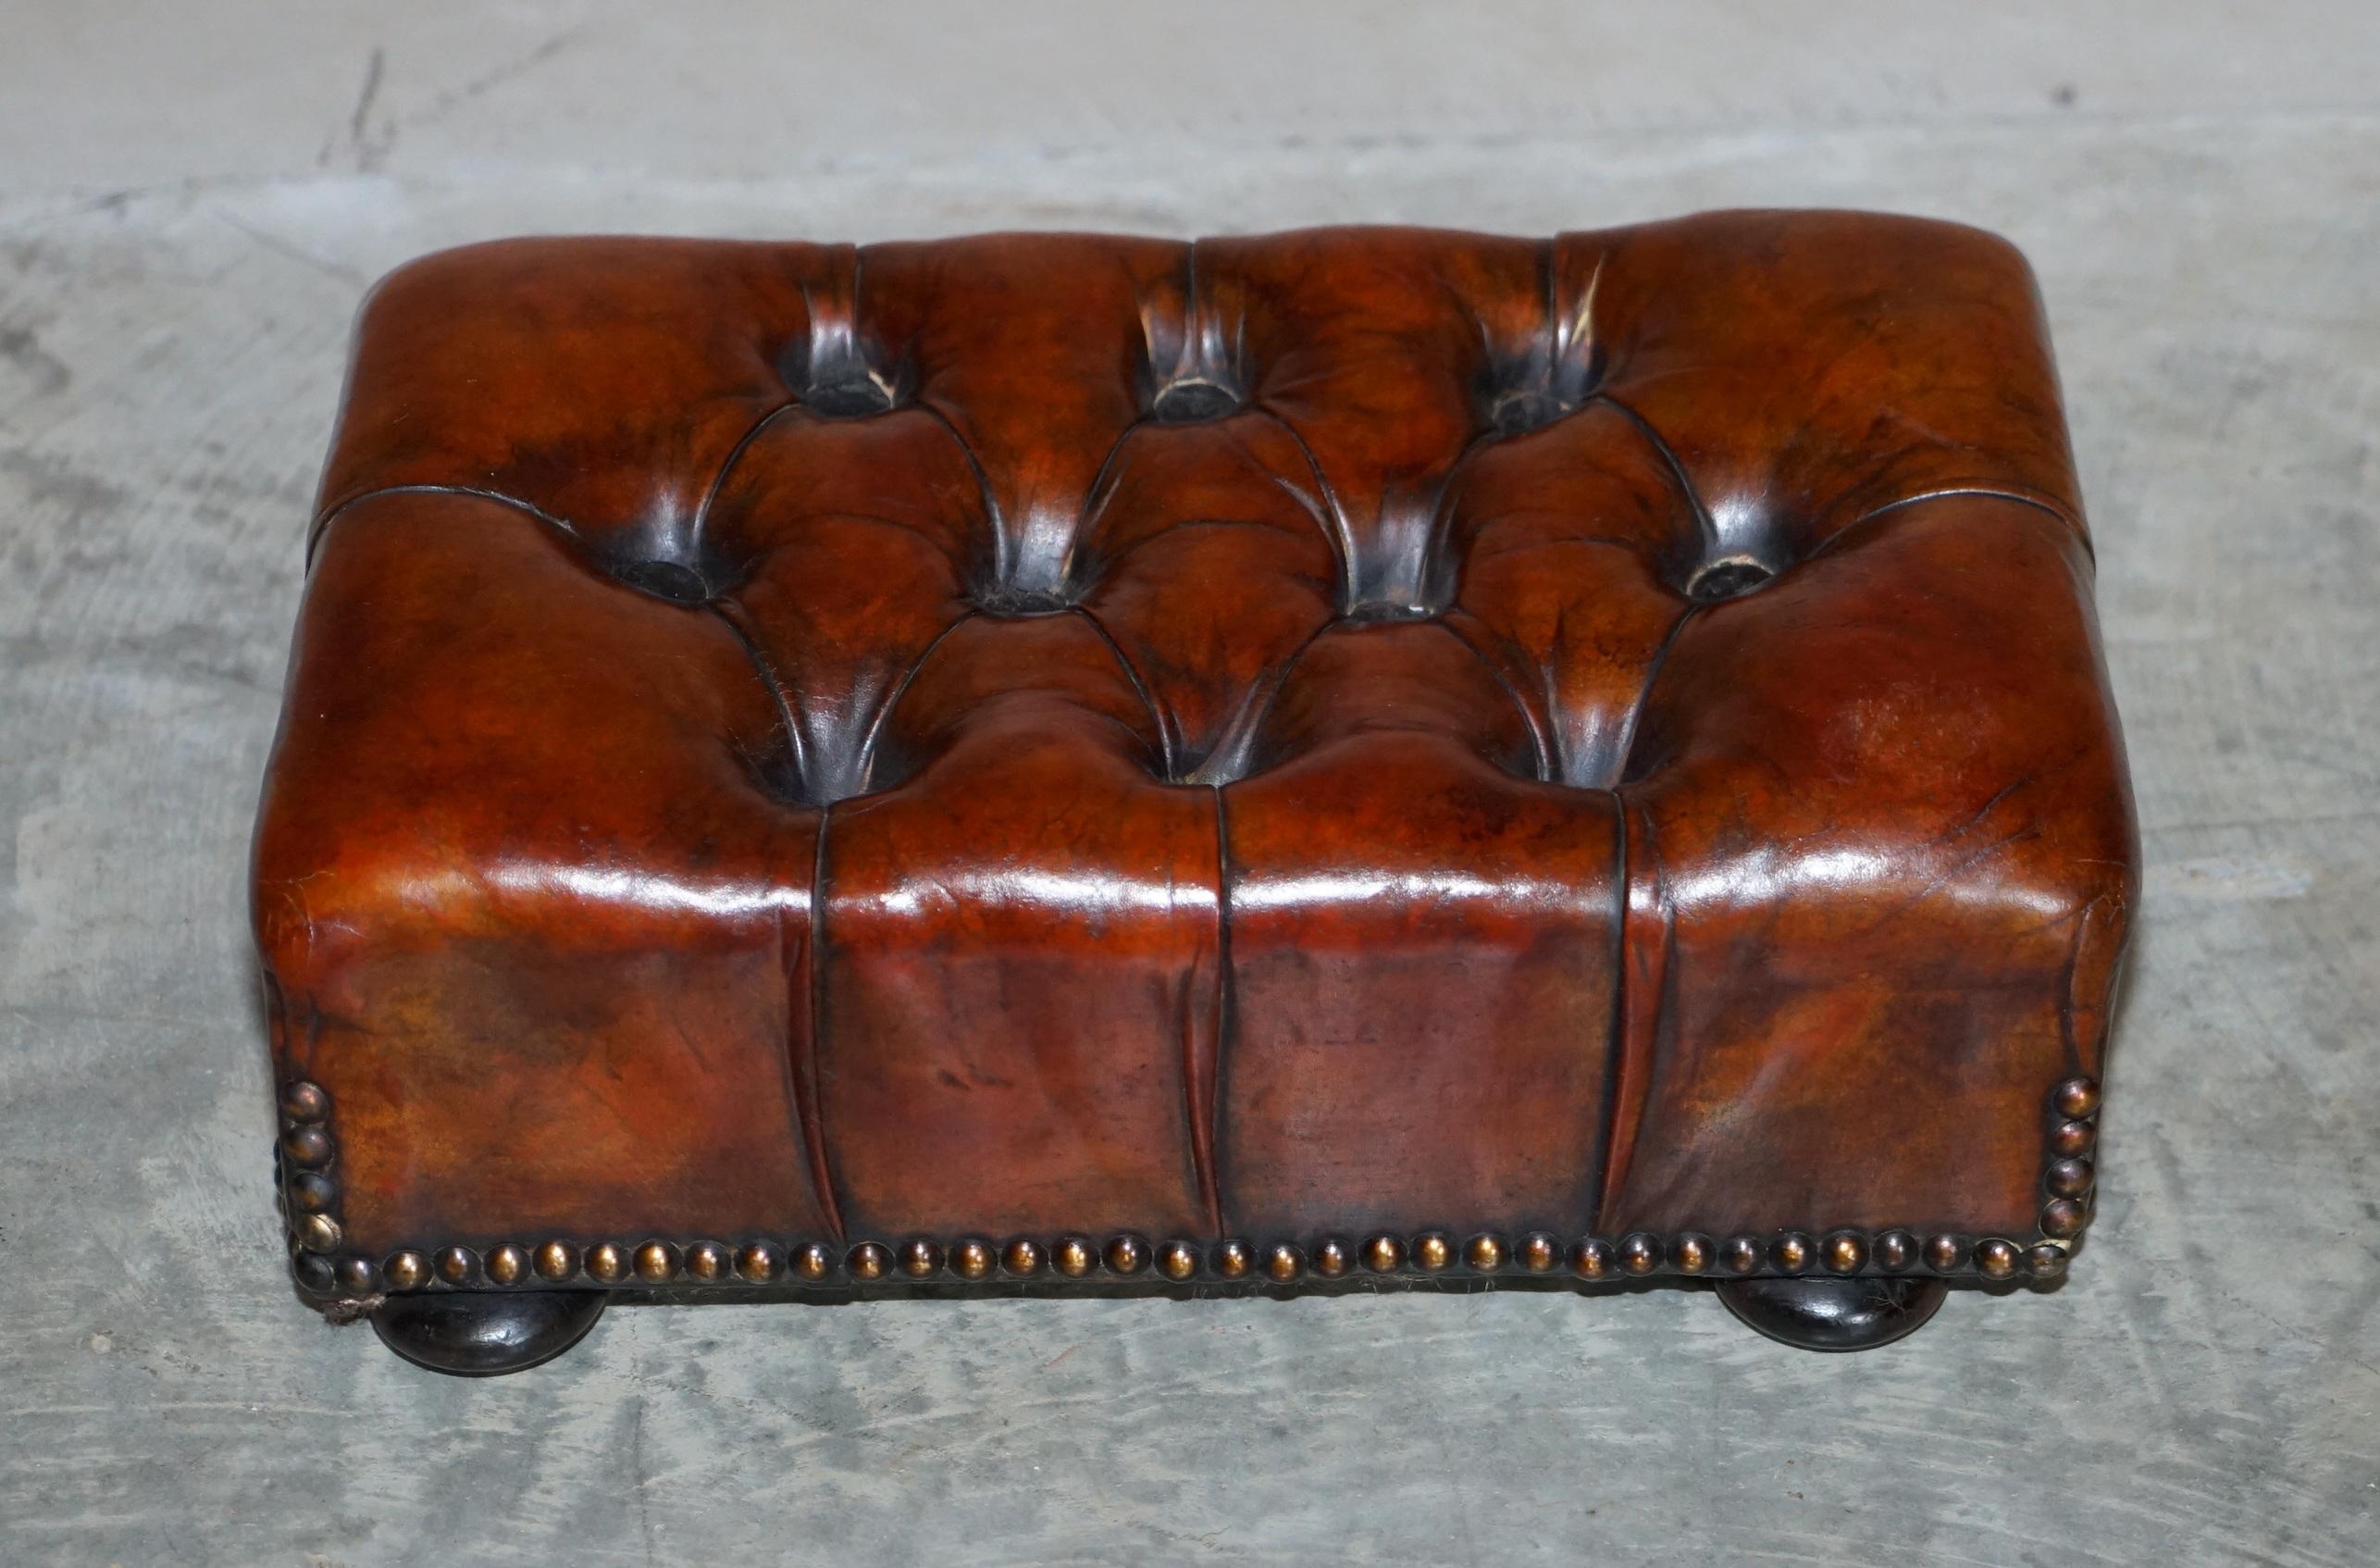 We are delighted to offer for sale this stunning, fully restored small, Wingback armchair, hand dyed rich cigar brown leather Chesterfield footstool.

A very good looking and well made stool, it has been upholstered with high grade premium cattle